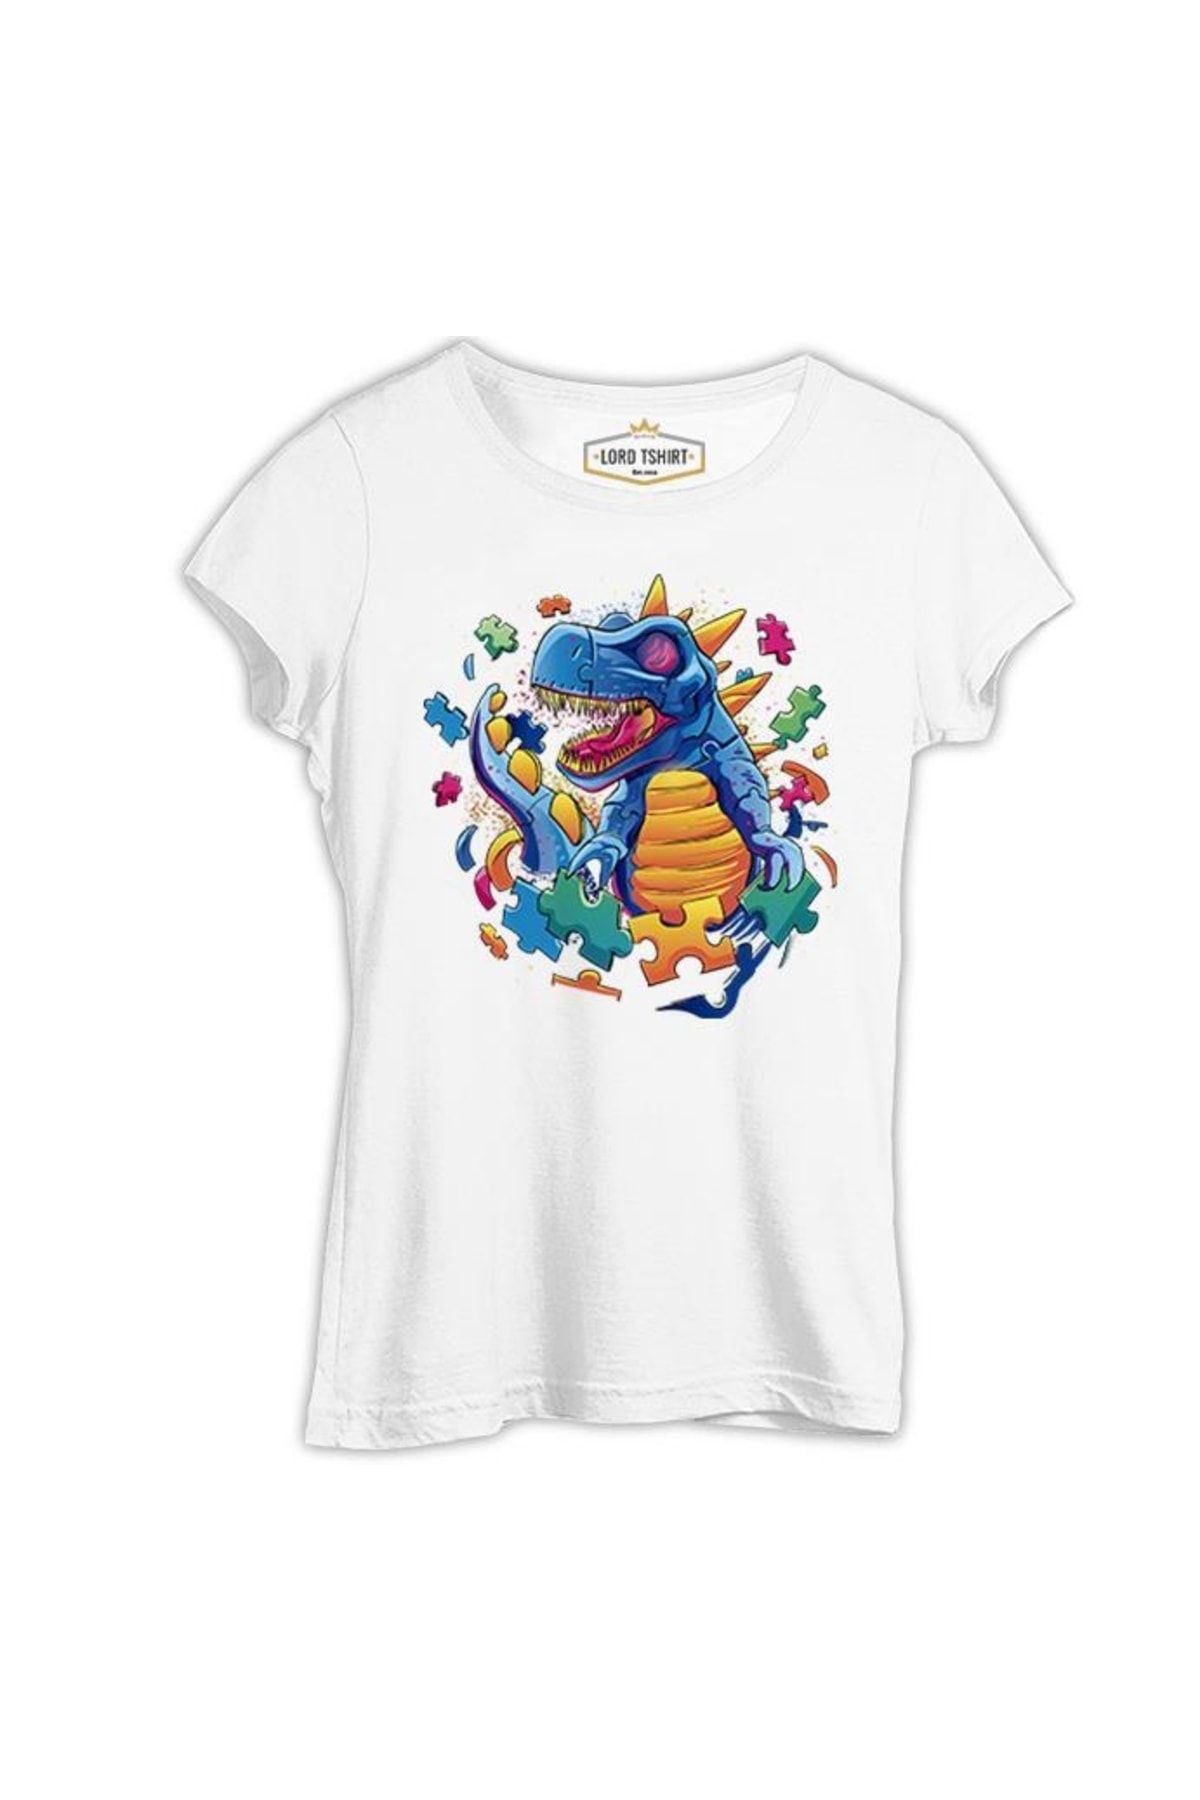 Lord T-Shirt Dinosaur With Puzzle Pieces Around Beyaz Tshirt